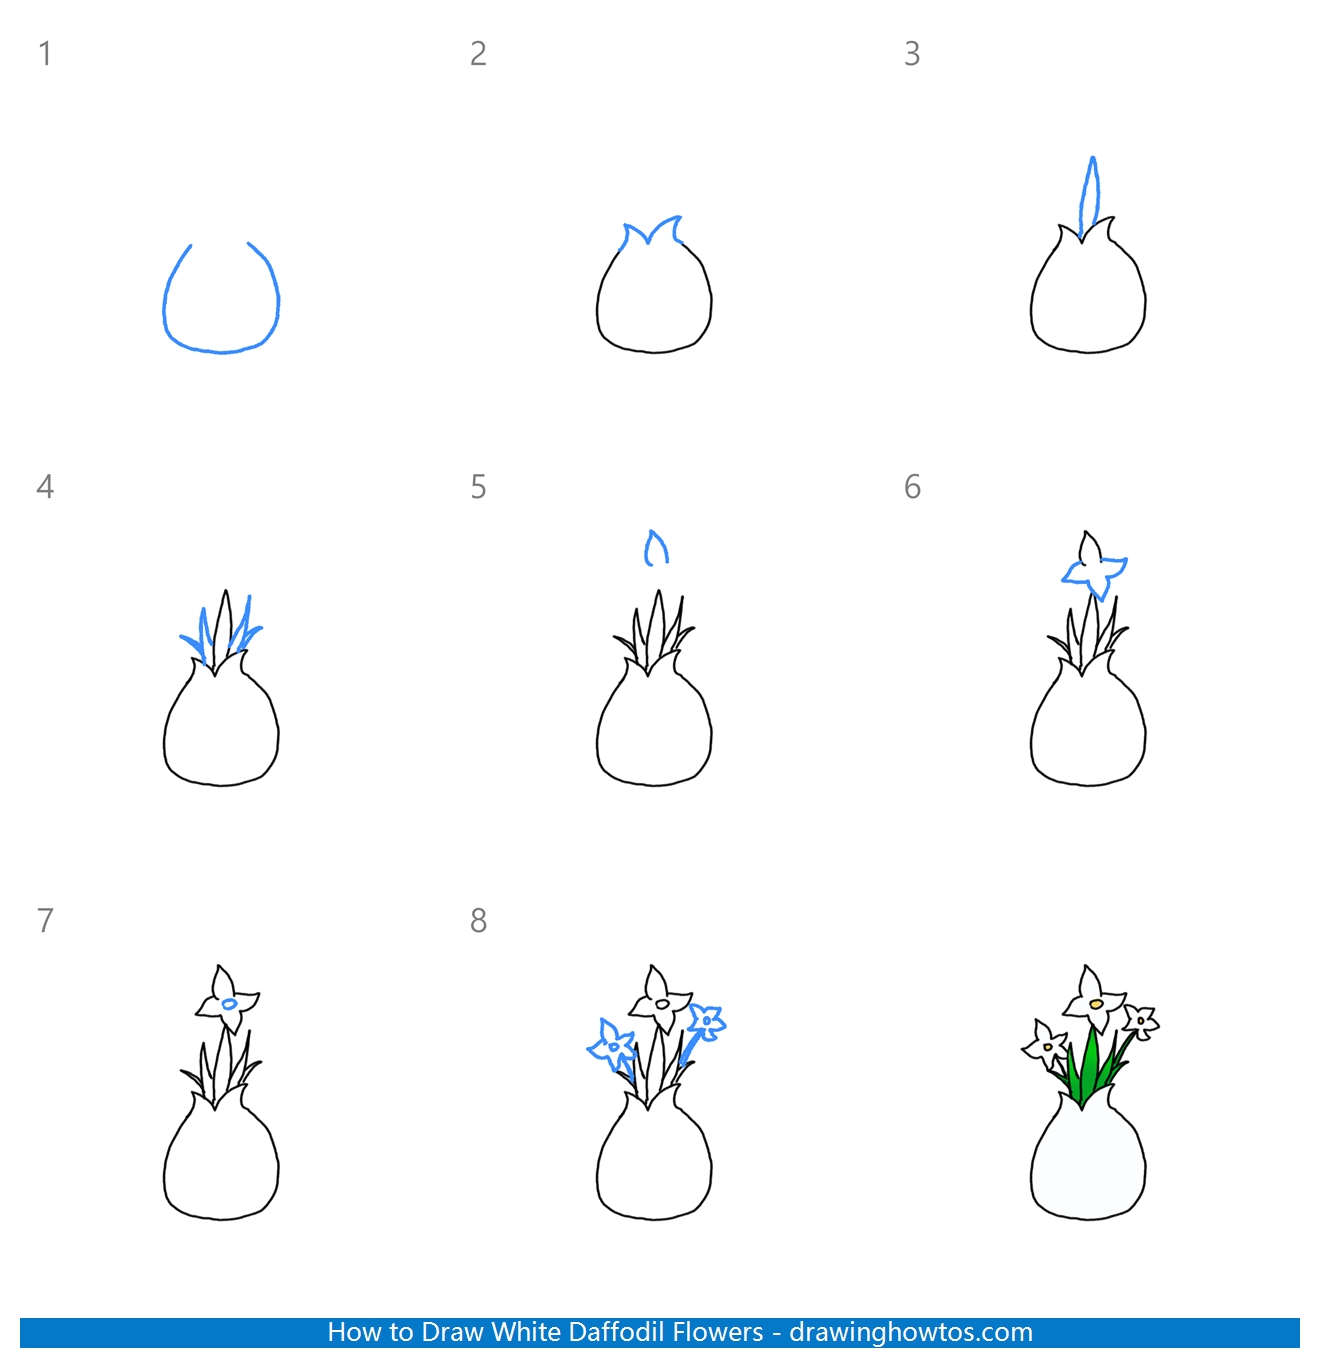 How to Draw White Narcissus Flowers Step by Step